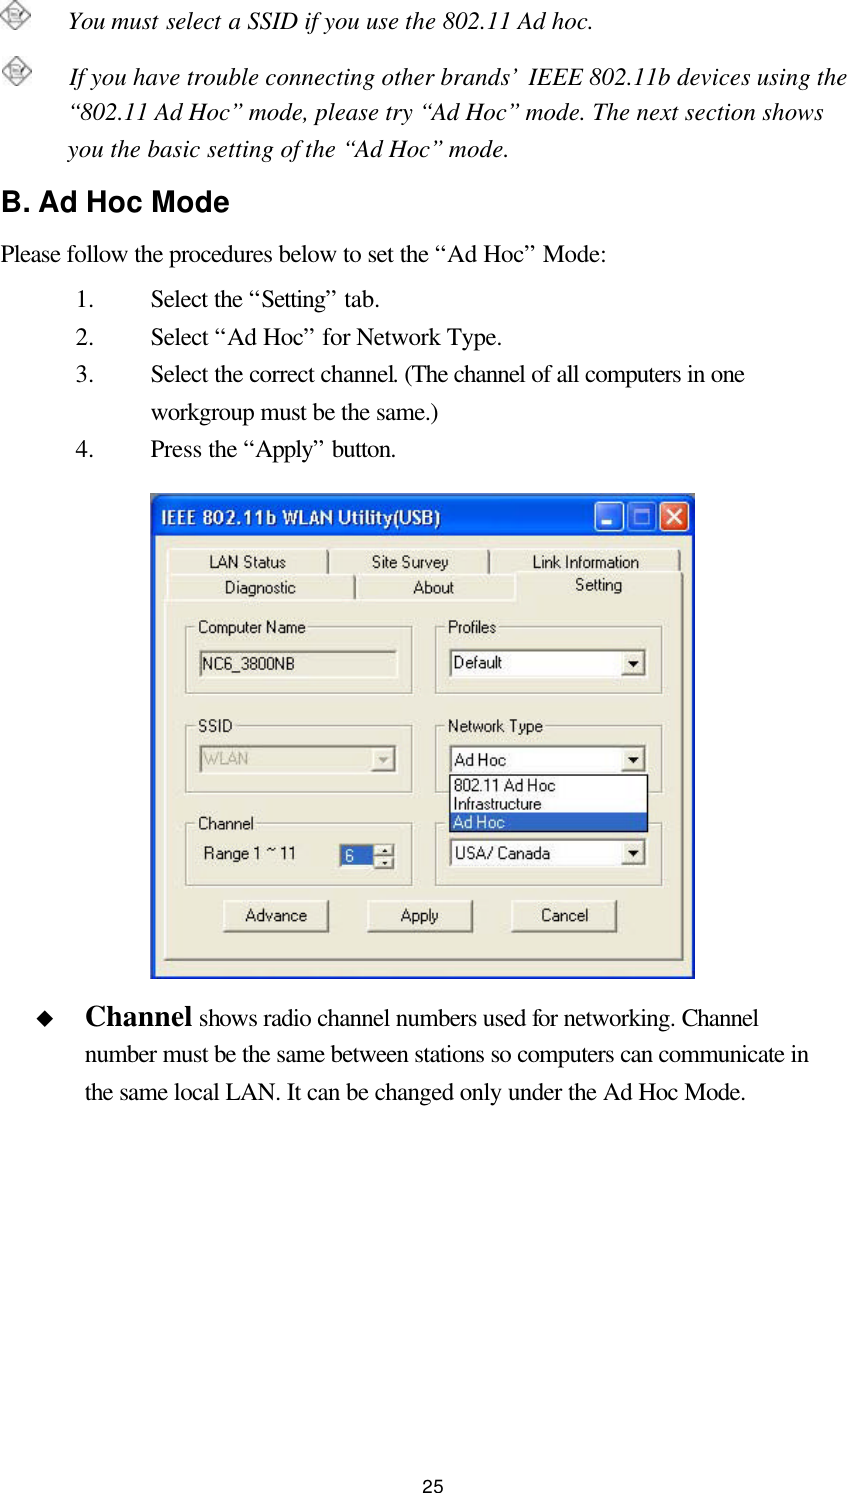  25    You must select a SSID if you use the 802.11 Ad hoc.    If you have trouble connecting other brands’ IEEE 802.11b devices using the “802.11 Ad Hoc” mode, please try “Ad Hoc” mode. The next section shows you the basic setting of the “Ad Hoc” mode. B. Ad Hoc Mode Please follow the procedures below to set the “Ad Hoc” Mode: 1.  Select the “Setting” tab. 2.  Select “Ad Hoc” for Network Type. 3.  Select the correct channel. (The channel of all computers in one workgroup must be the same.) 4.  Press the “Apply” button. u Channel shows radio channel numbers used for networking. Channel number must be the same between stations so computers can communicate in the same local LAN. It can be changed only under the Ad Hoc Mode.   